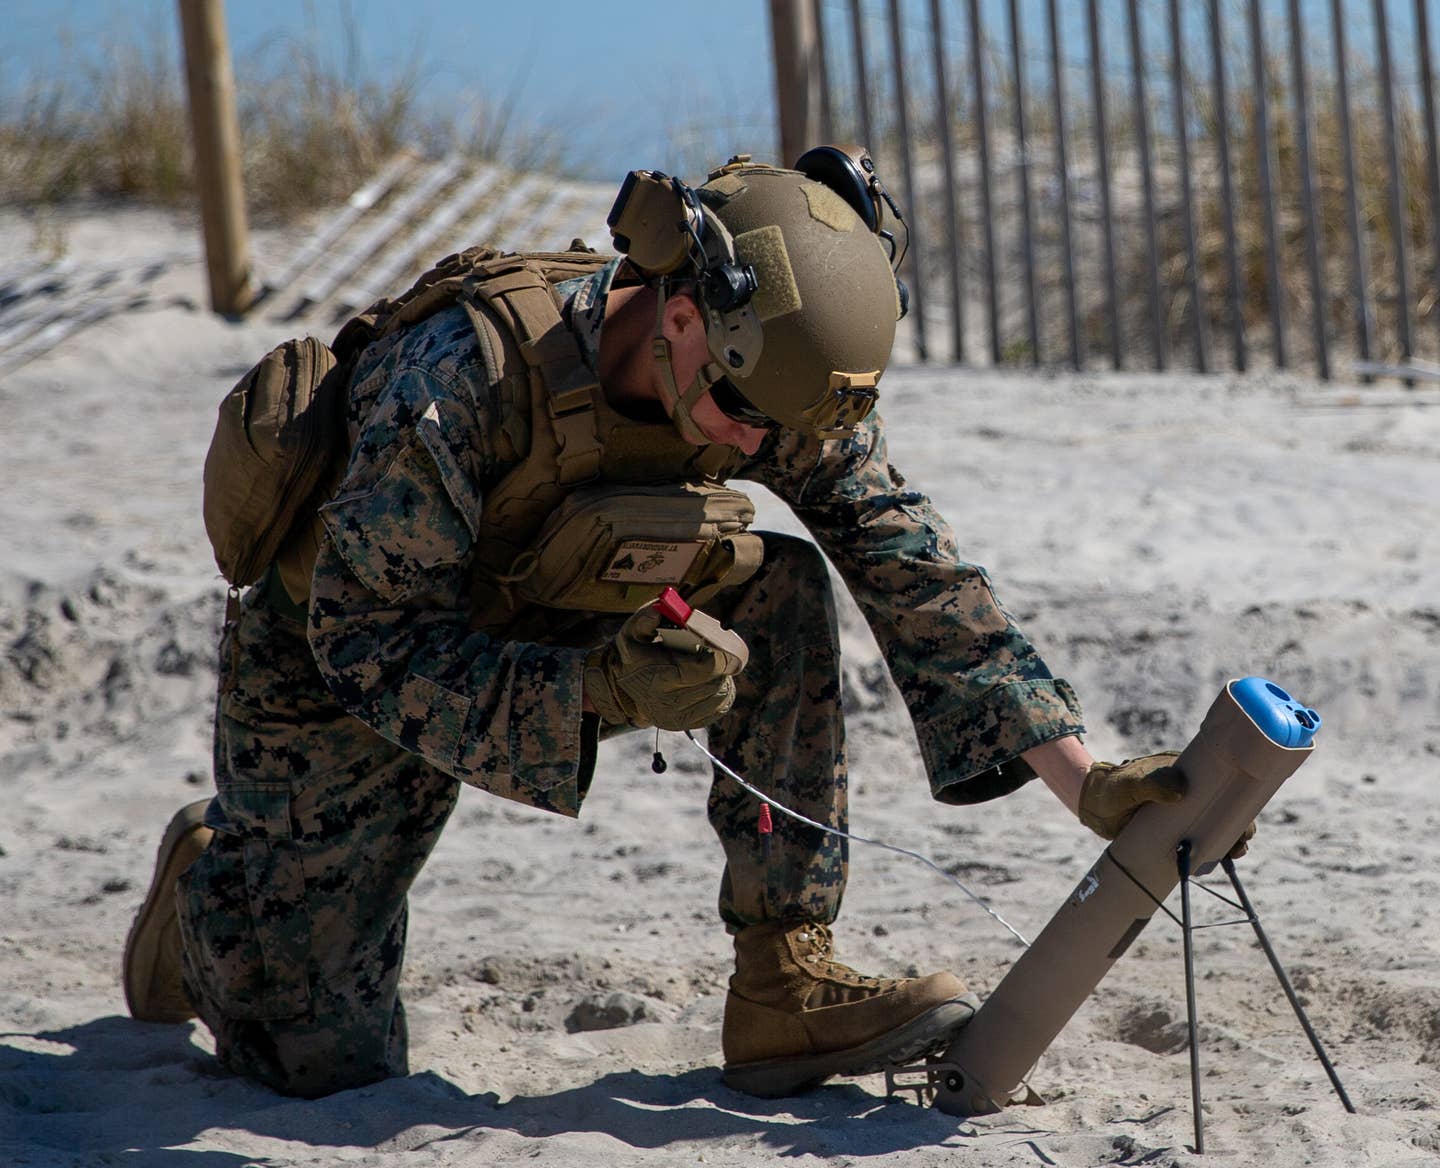 U.S. Marine Corps Cpl. Julian Alvarado, prepares to launch a Switchblade unmanned aircraft system during Littoral Exercise II (LEX II) on Camp Lejeune, North Carolina, March 3, 2022. U.S. Marine Corps photo by Lance Cpl. Ryan Ramsammy